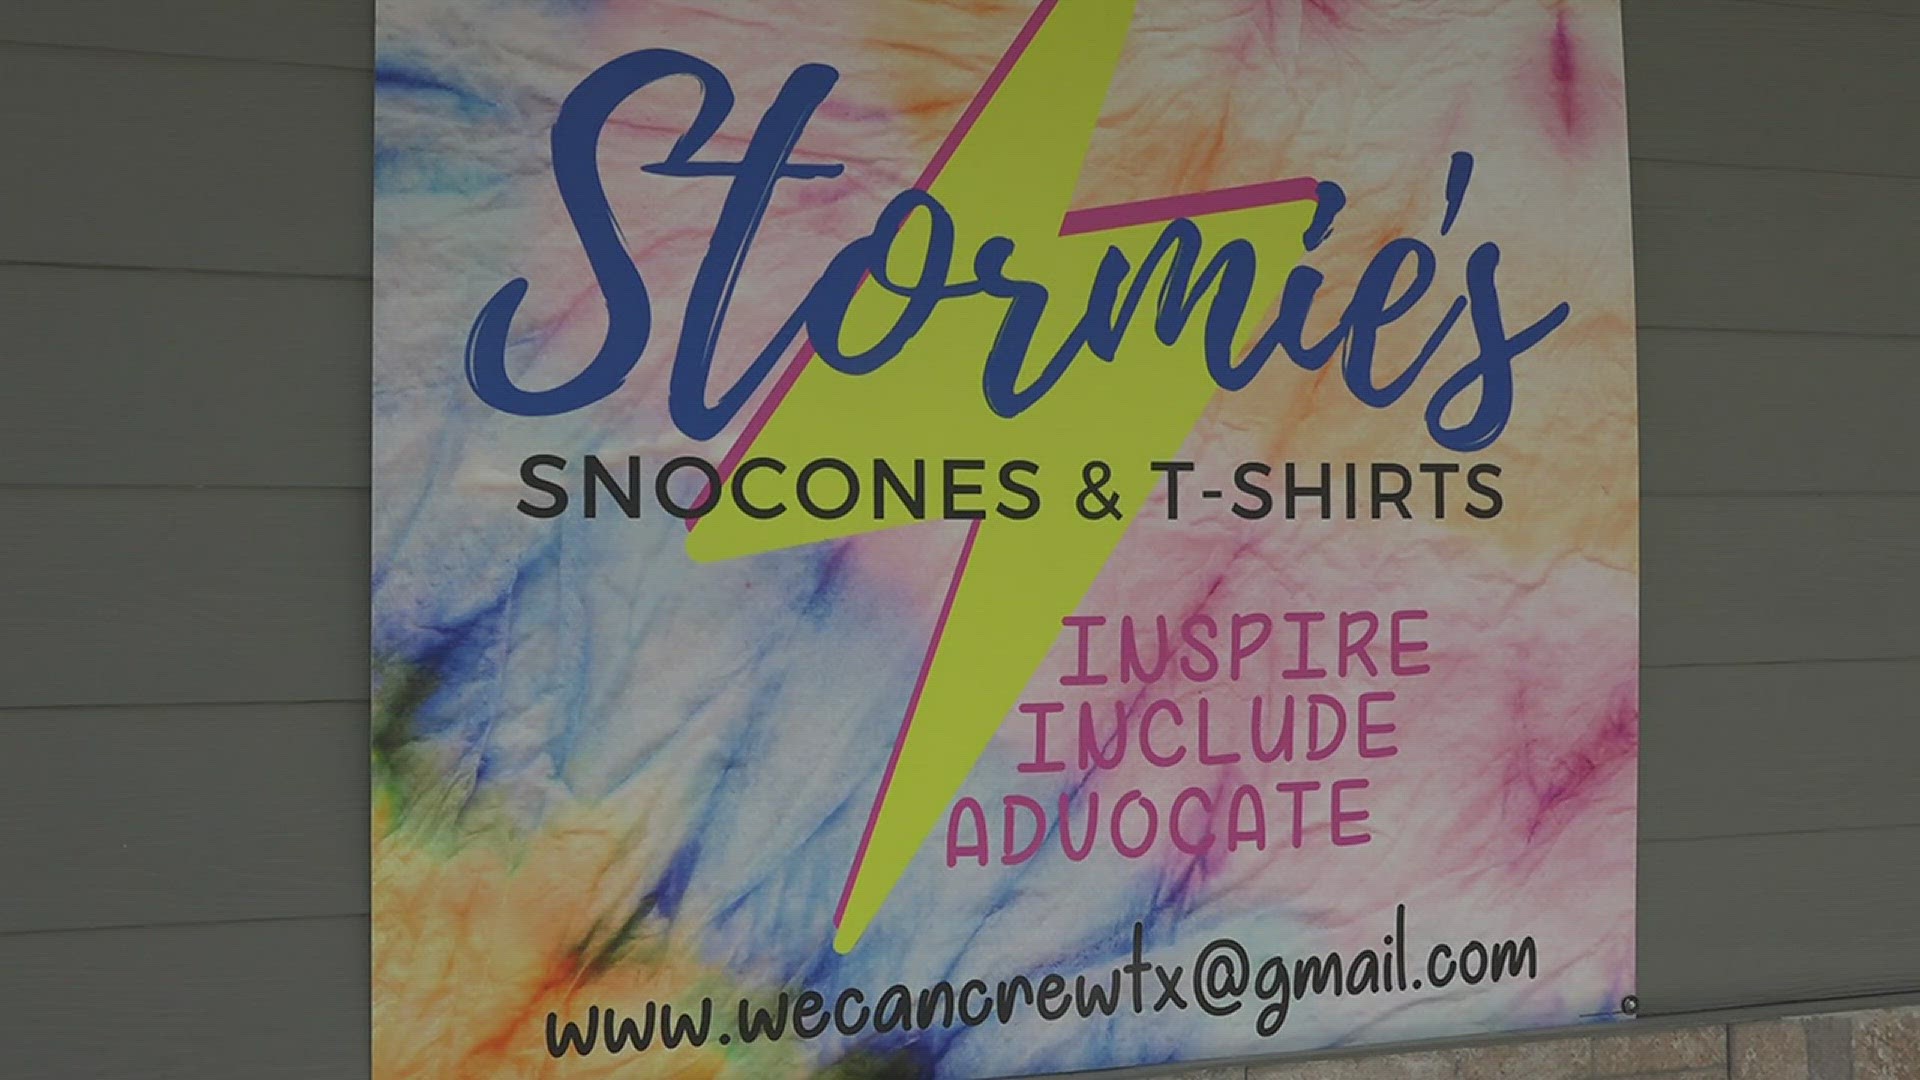 Stormie's Snocones & T-Shirts not only sells delicious treats but also teaches it's employees valuable skills.